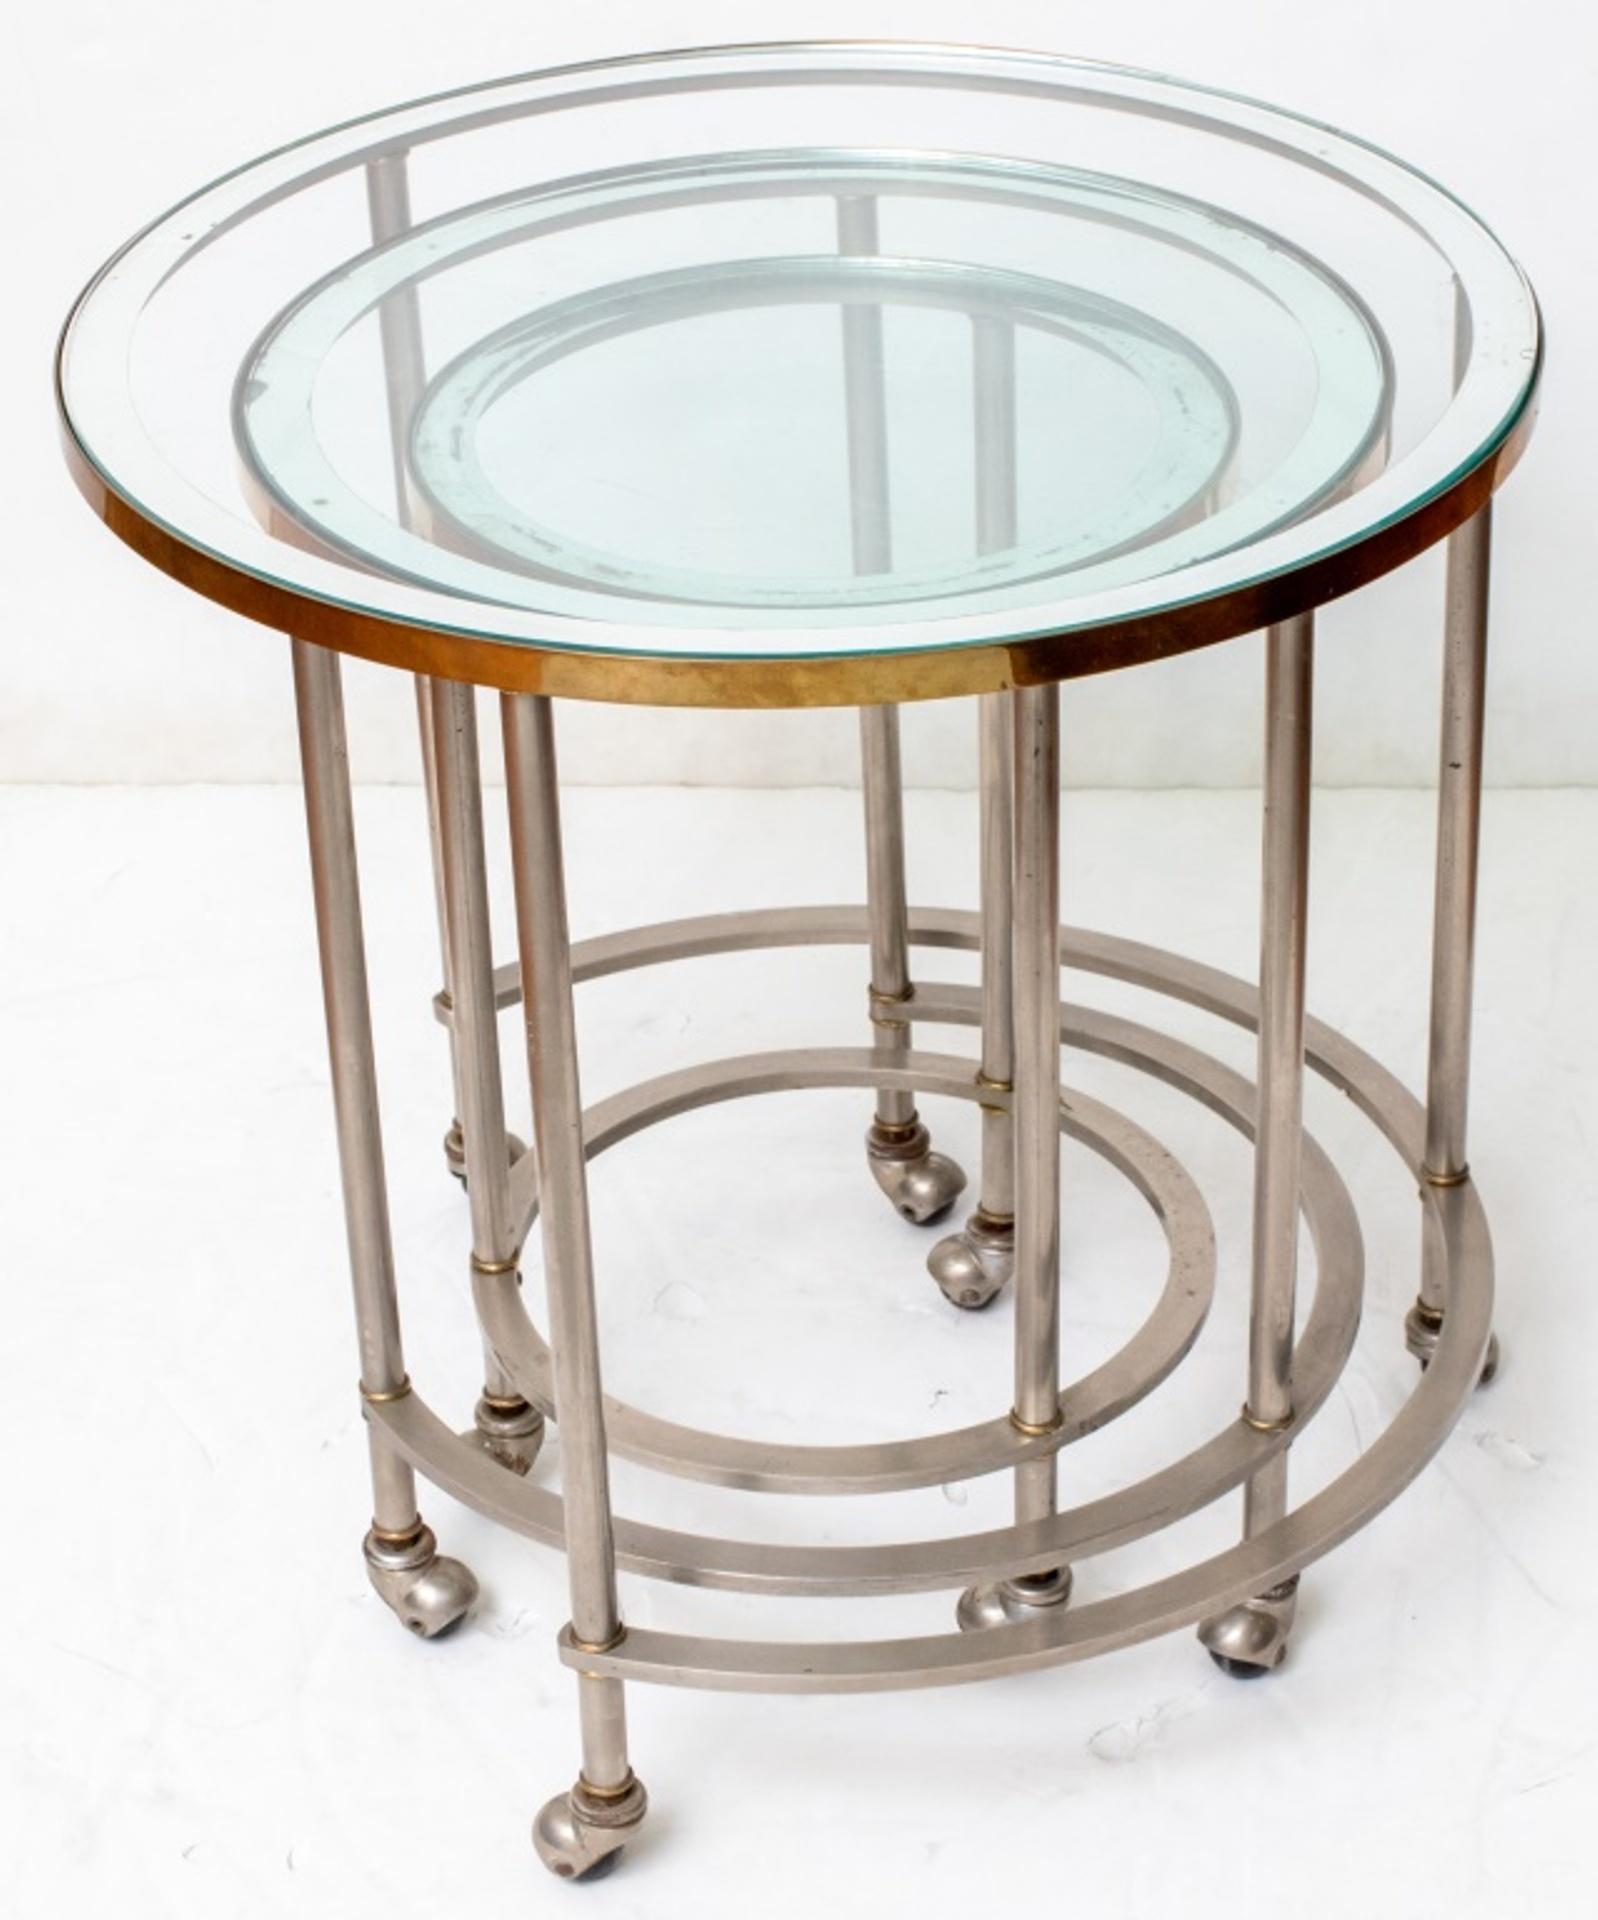 Three mid century chrome nesting tables with glass tops, all on caster wheels. 
Dimensions: 22.25